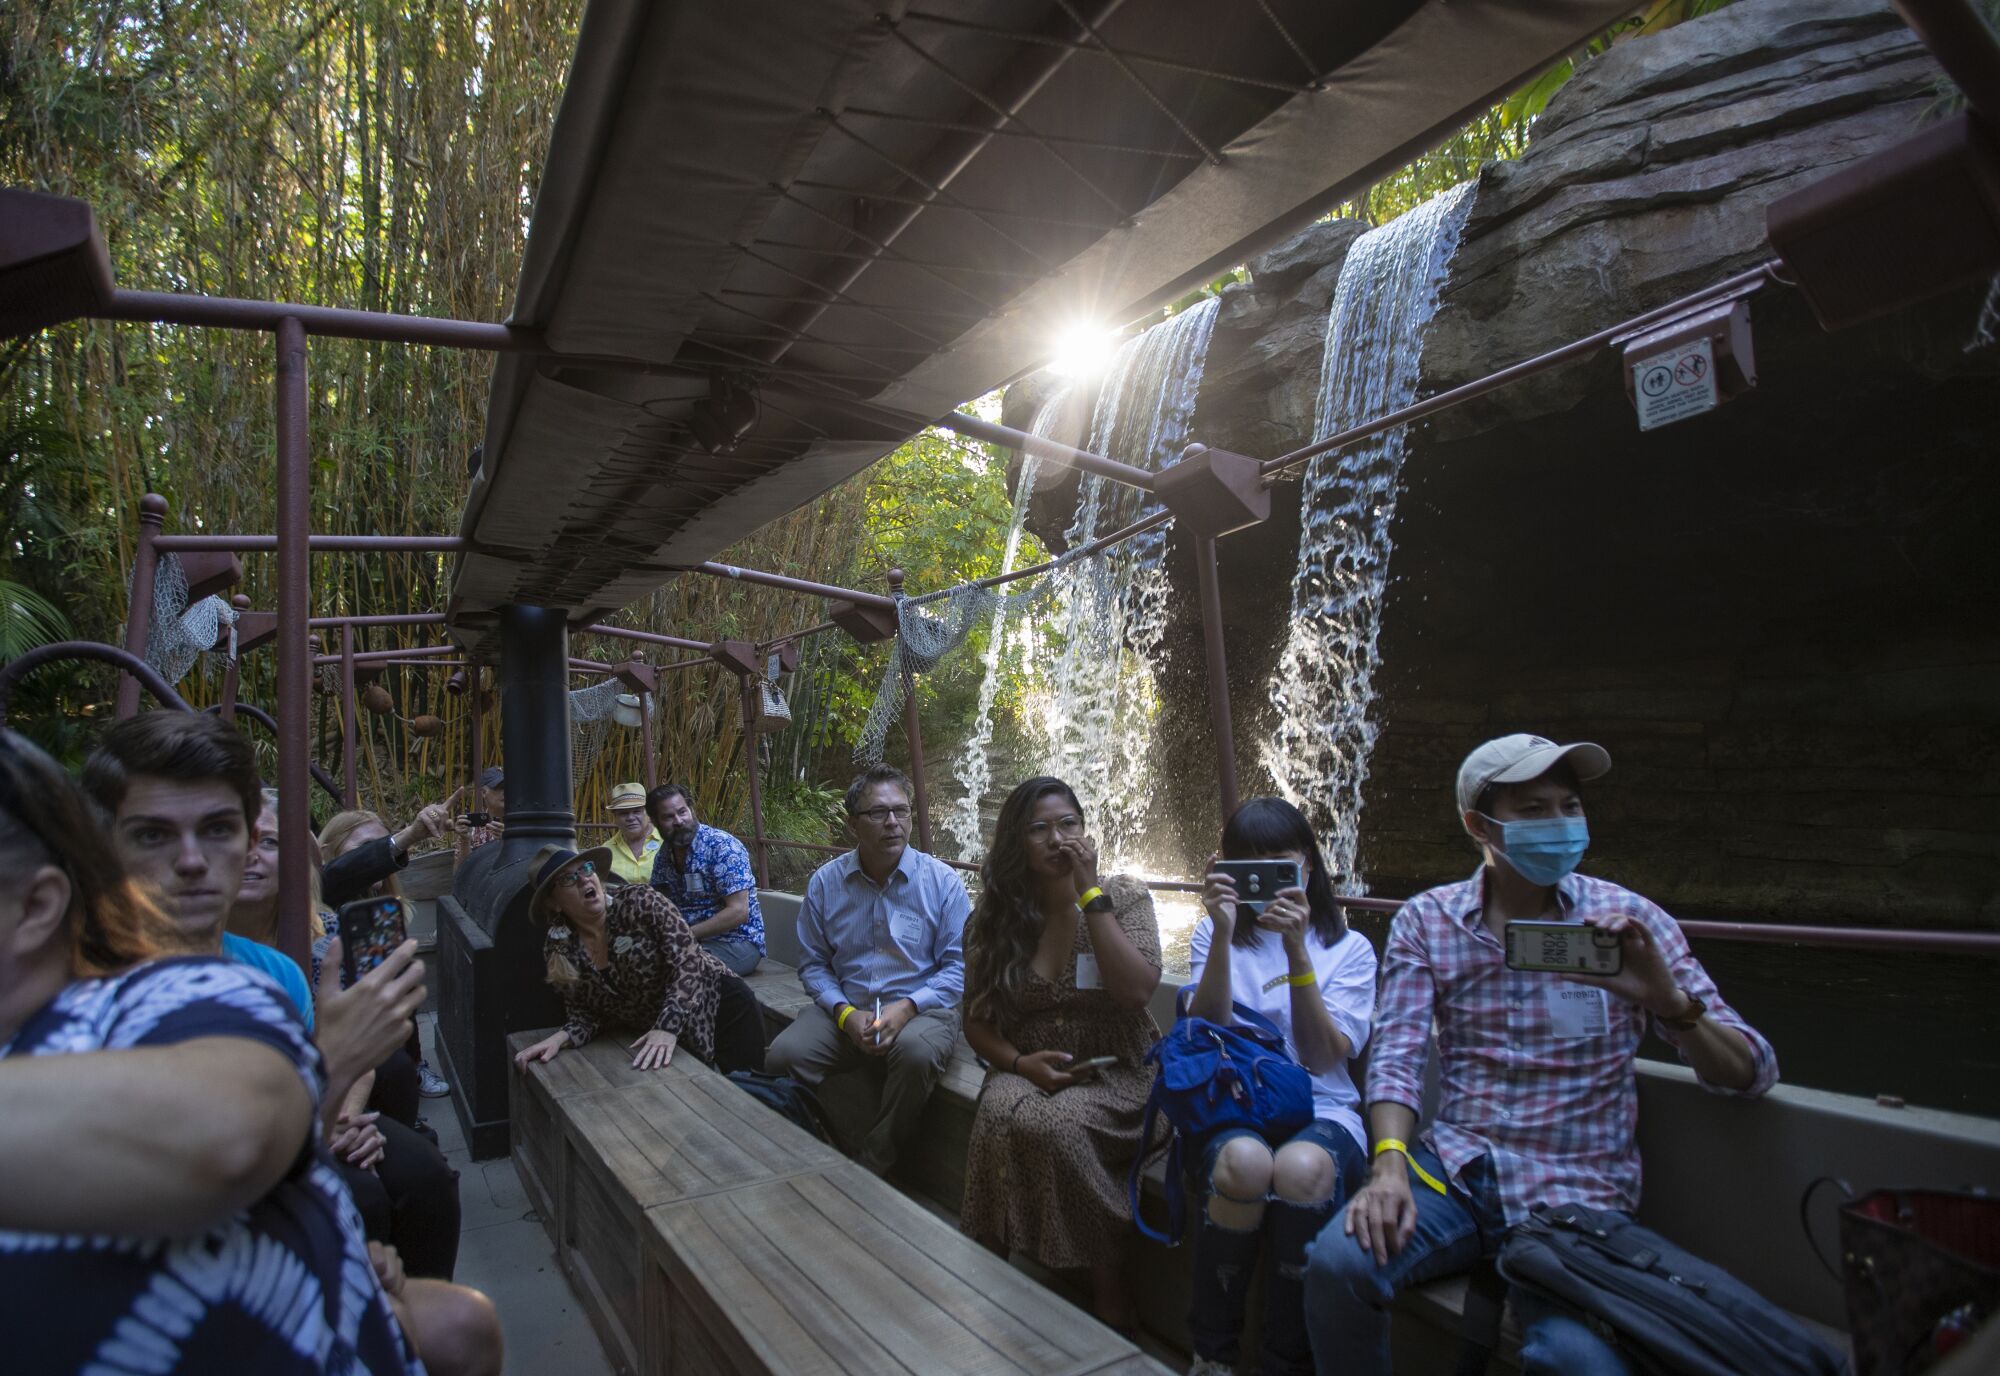 Riders on benches on the Jungle Cruise ride pass in front of the Schweitzer Falls